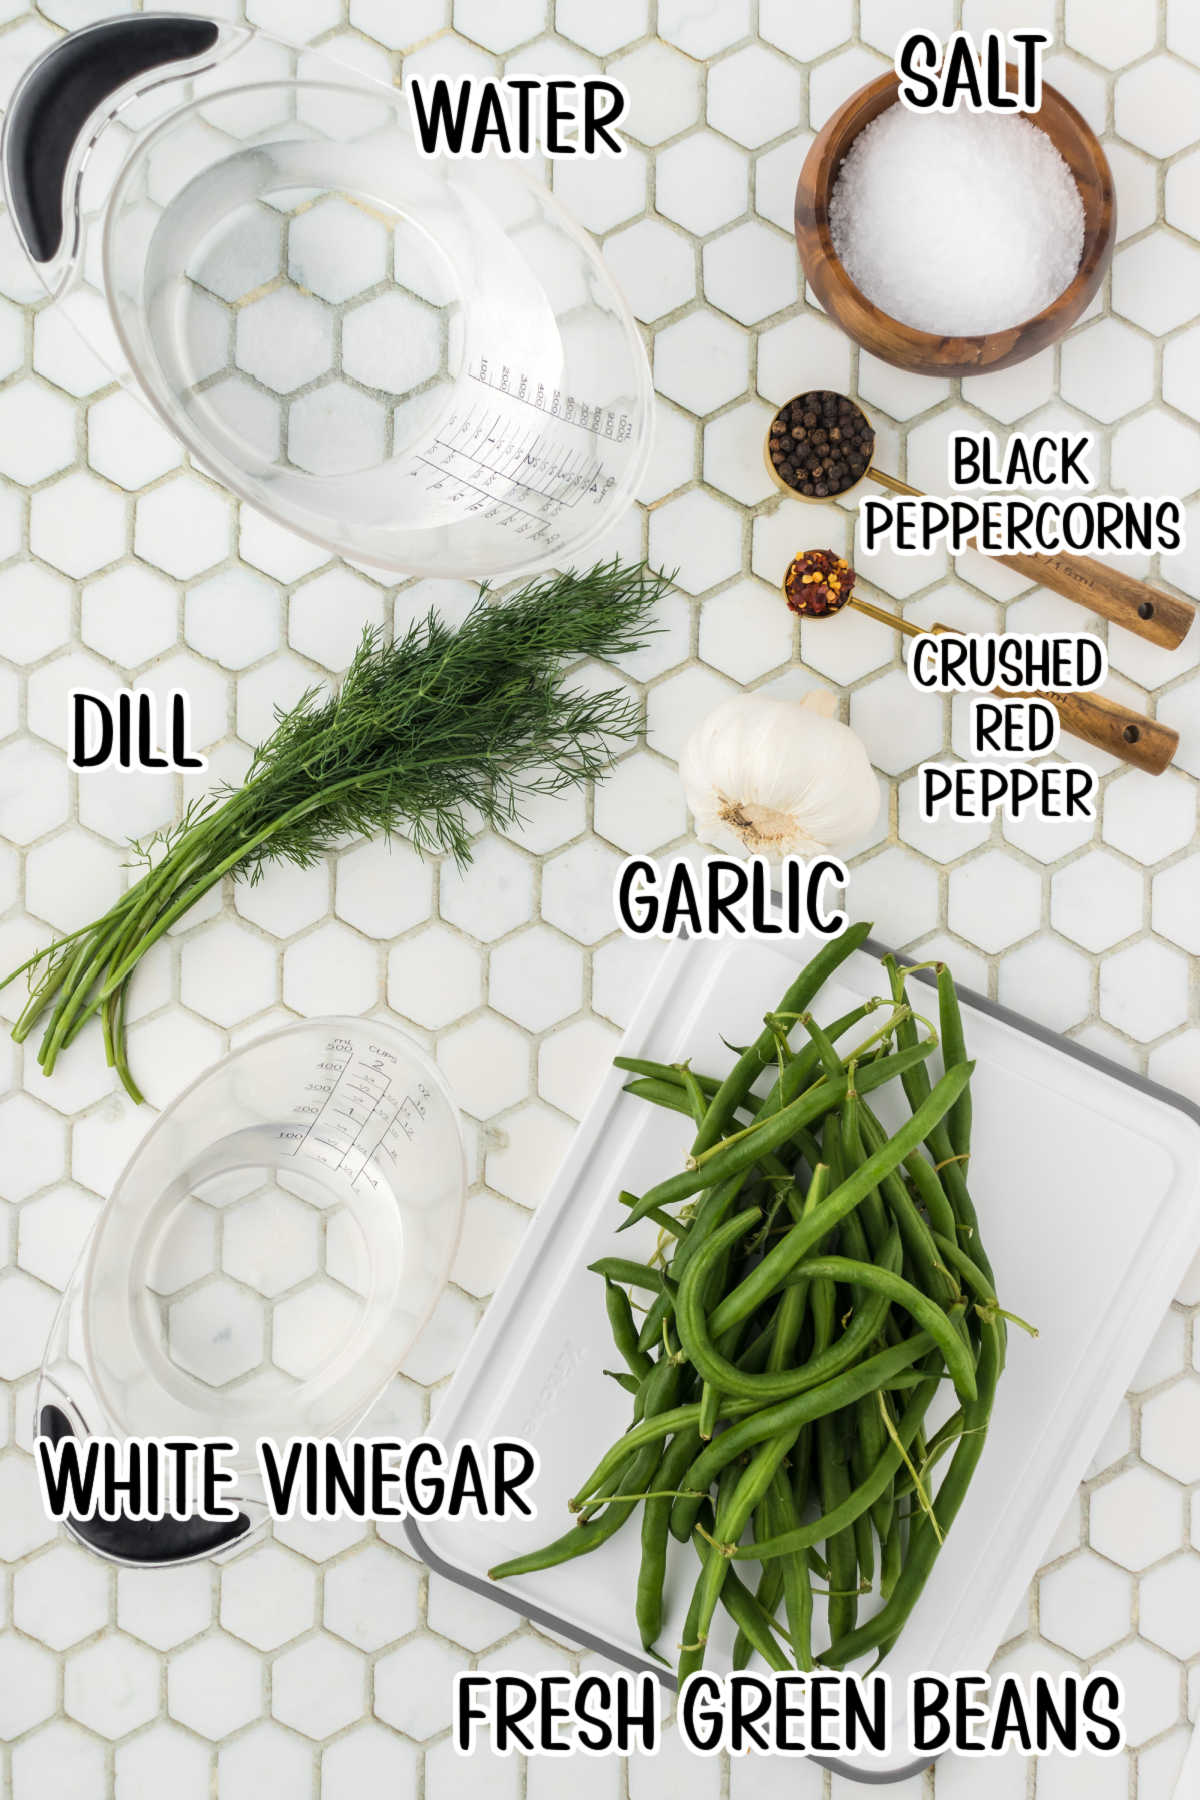 Labeled ingredients for quick pickled green beans.